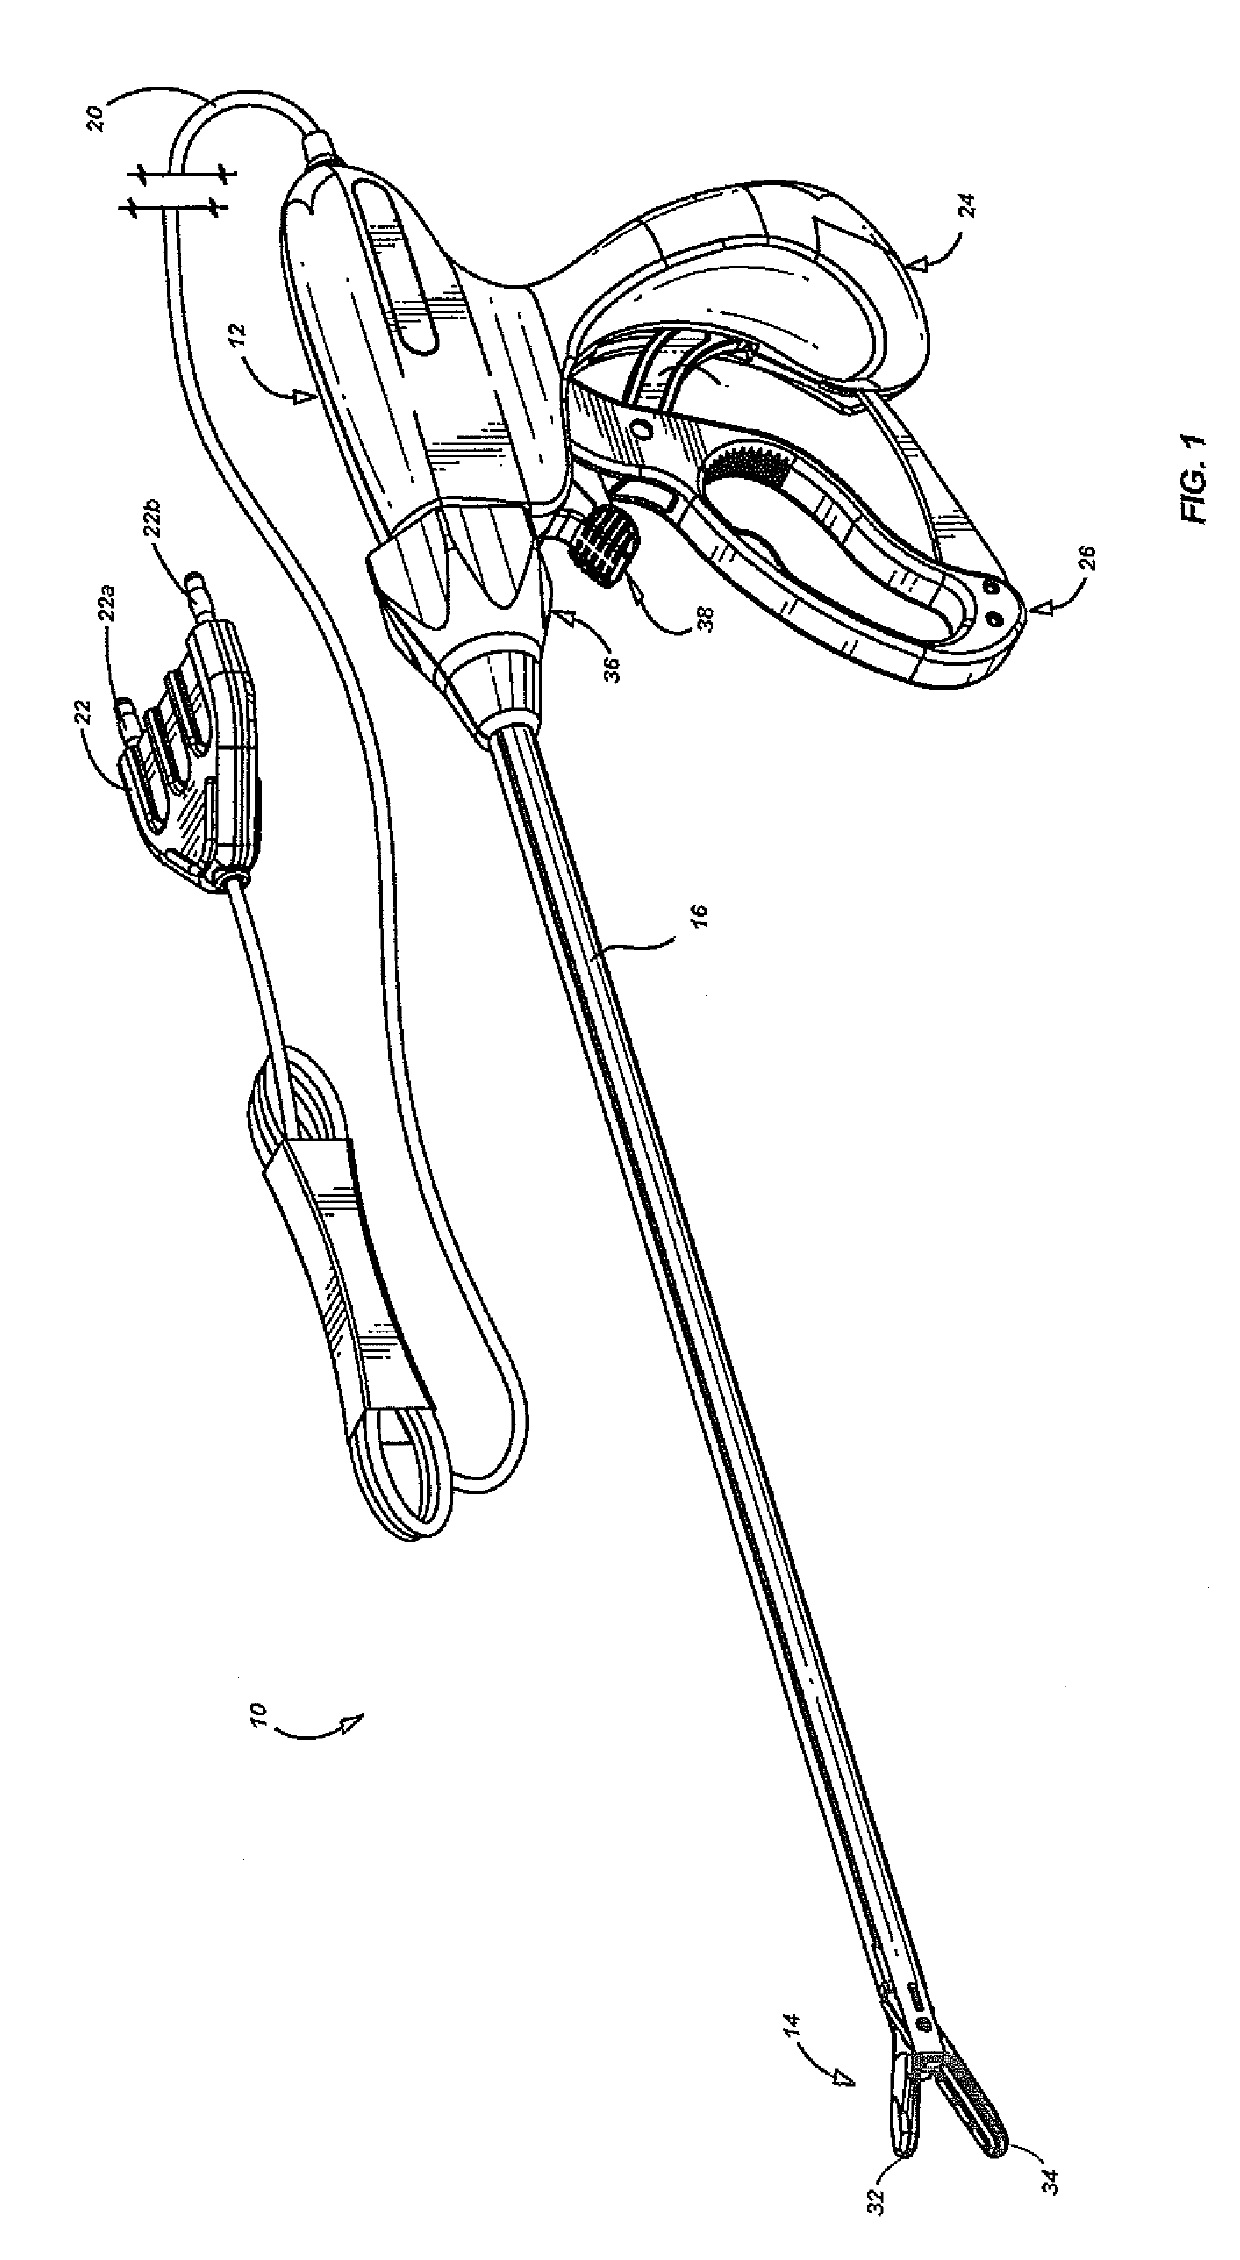 Pinion blade drive mechanism for a laparoscopic vessel dissector